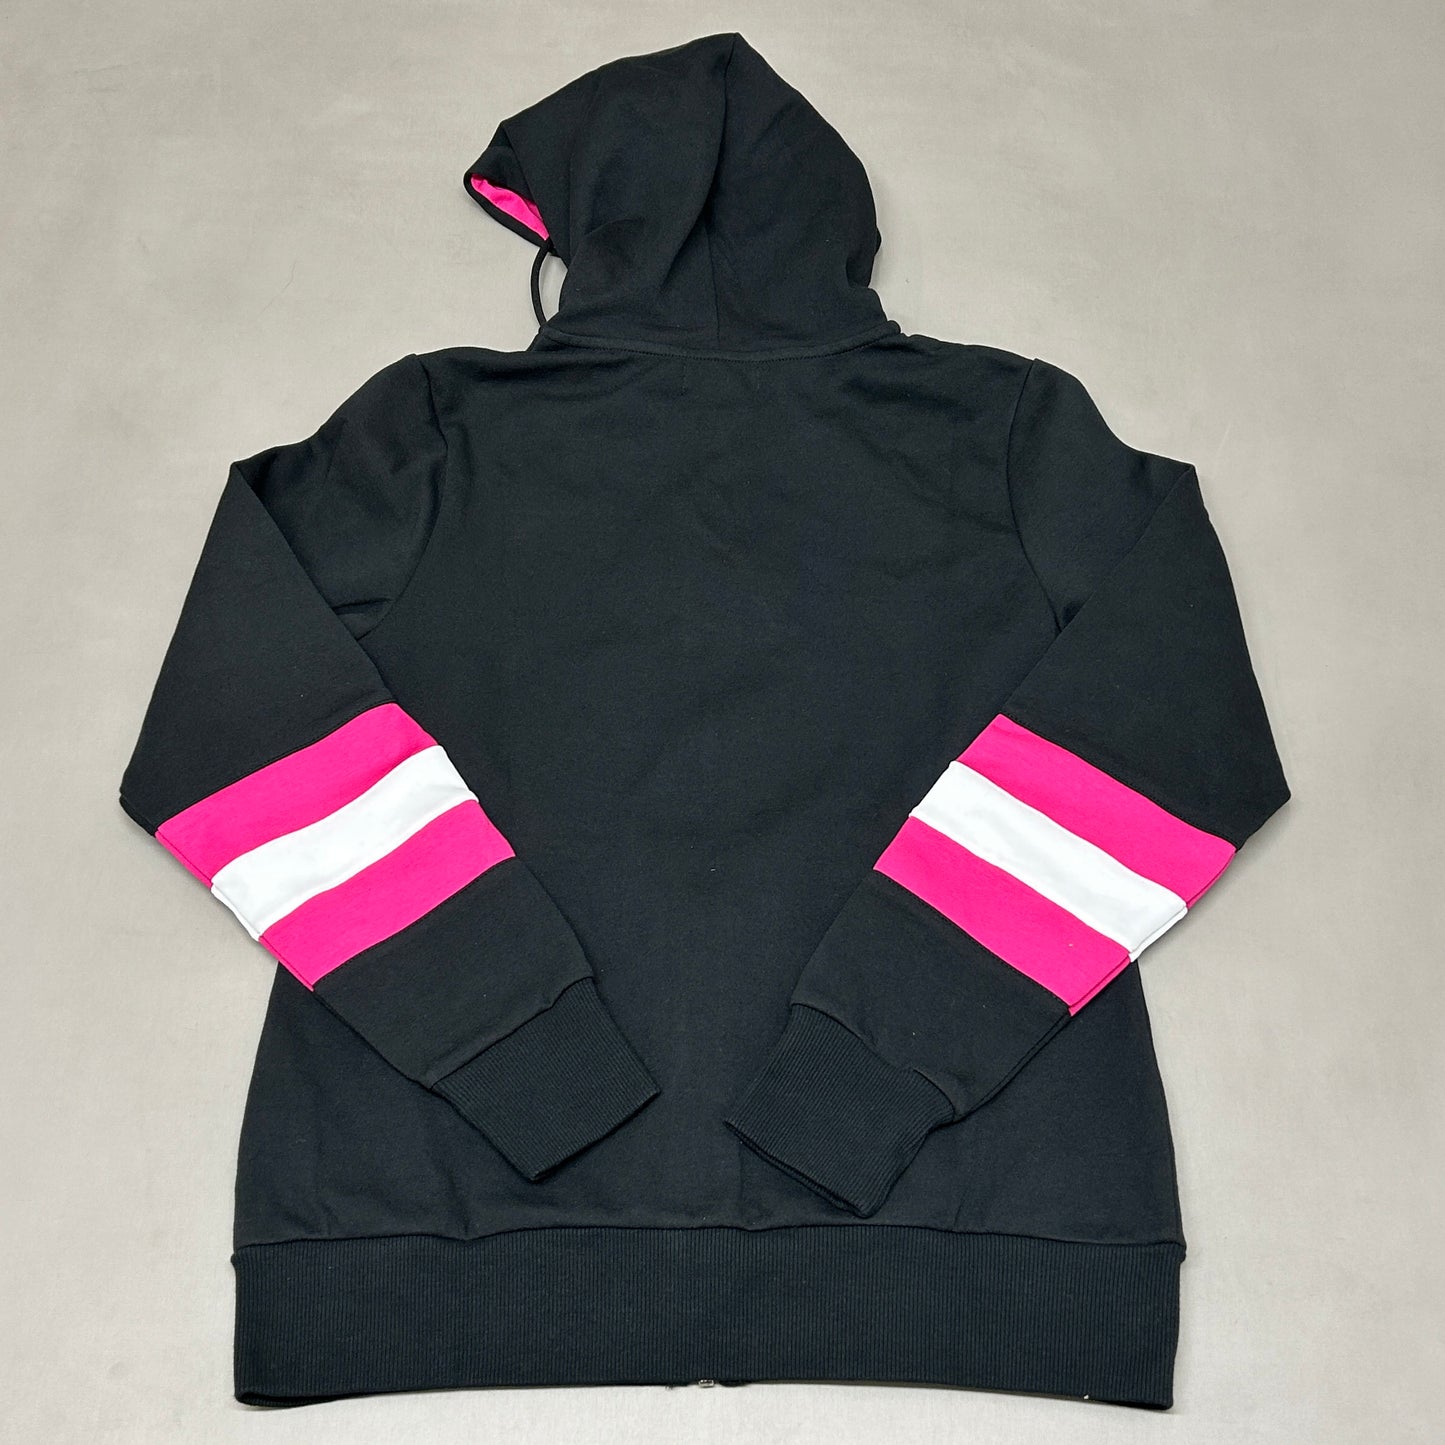 T-MOBILE Hooded Striped Logo Employee Zipped Jacket Women's Small Black/Pink (New)